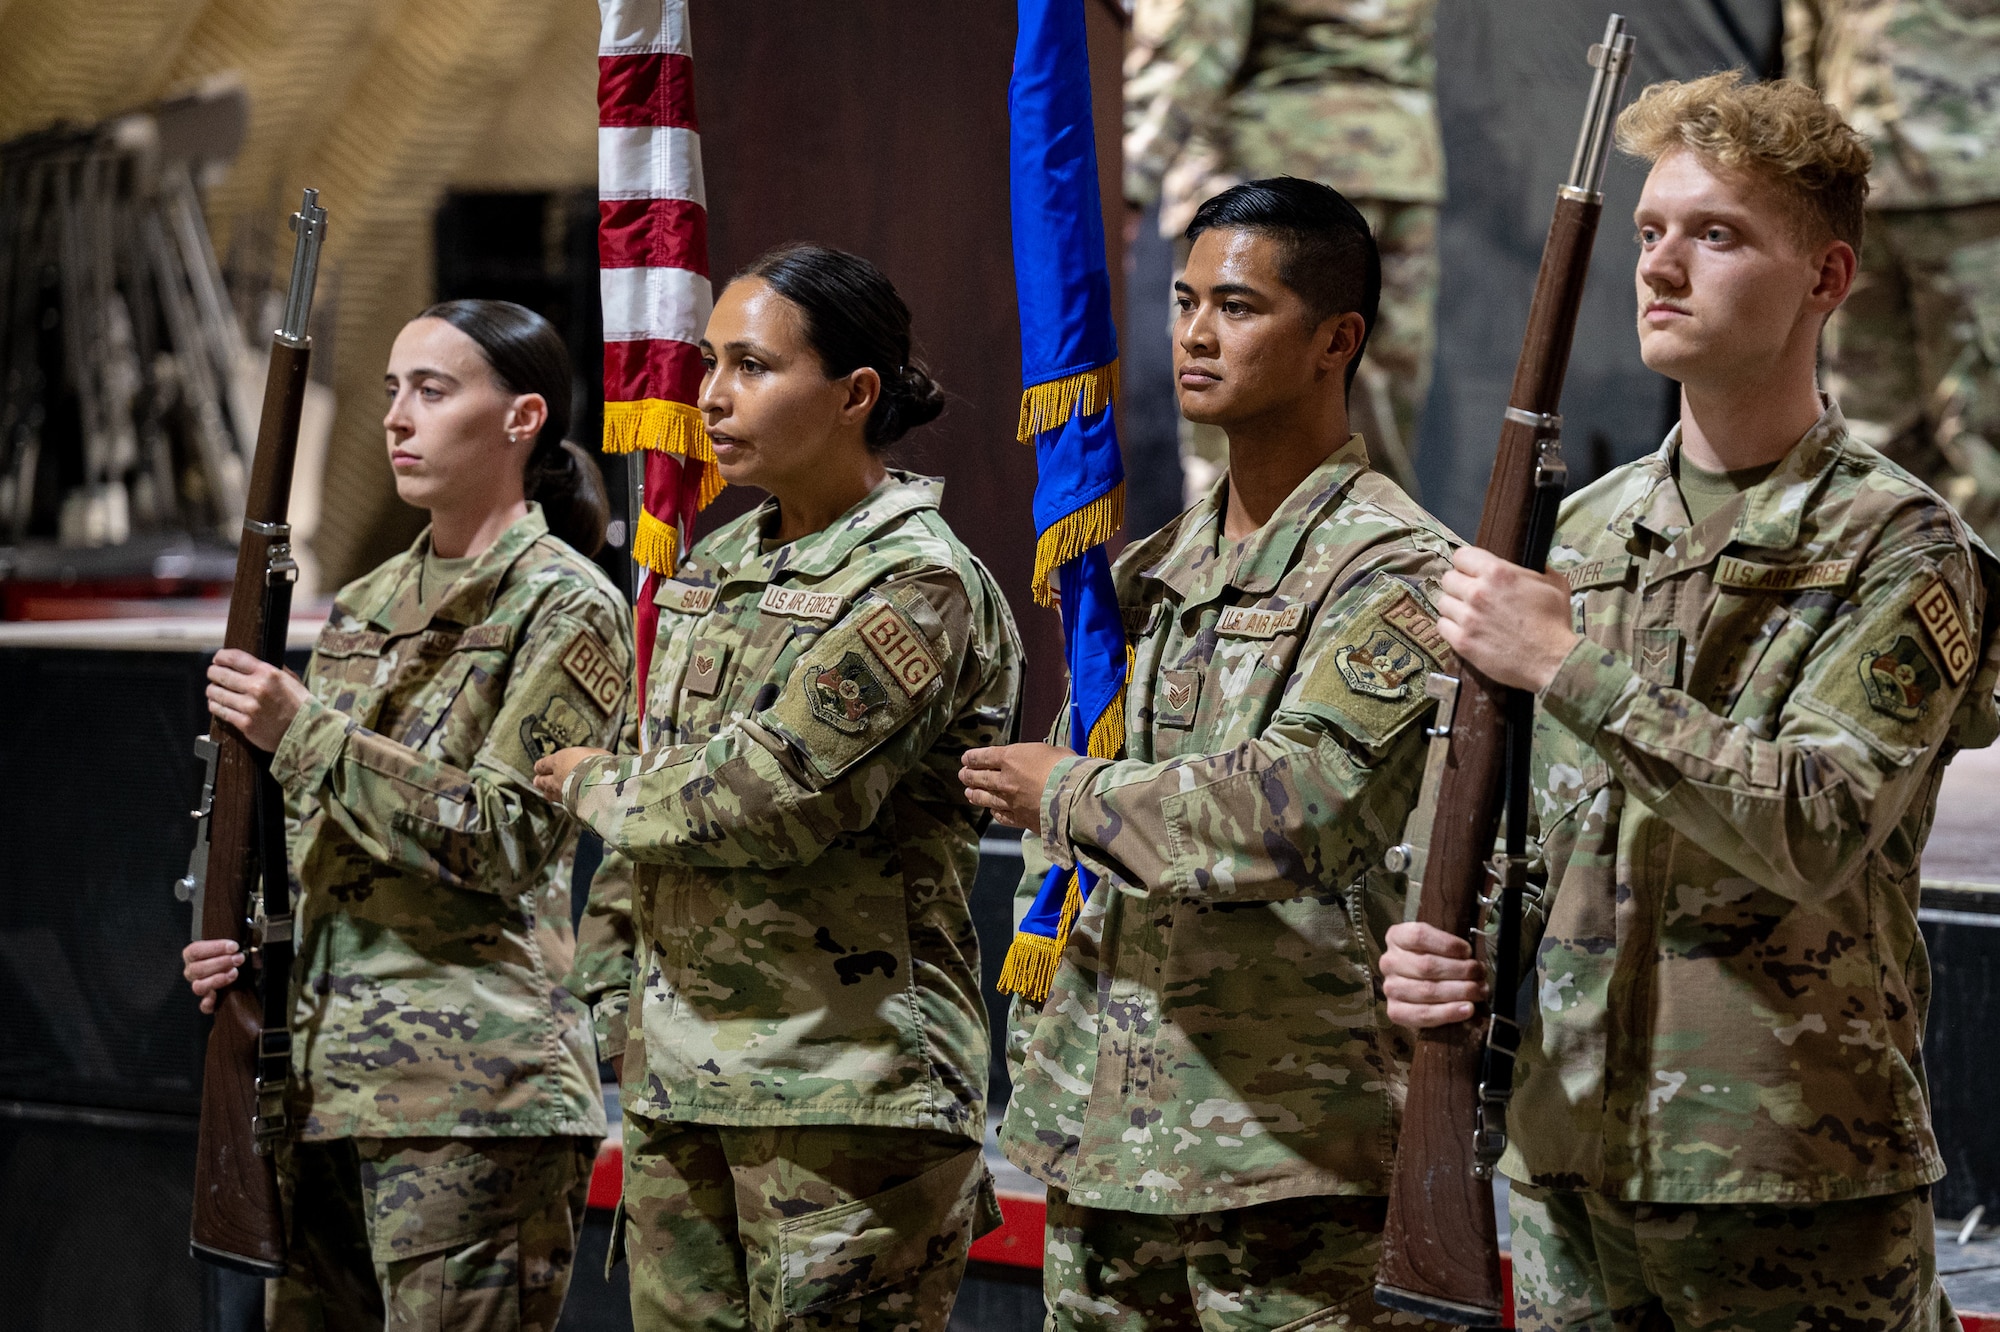 Staff Sgt. Taylor Solano, 332d Expeditionary Logistics Readiness Squadron Air Terminal Operations Center information controller and Base Honor Guard non-commissioned officer-in-charge, second from left, gives commands to the ceremonial detail during the master sergeant release ceremony at an undisclosed location in Southwest Asia, June 1, 2022. The Honor Guard provides military ceremonial support and dignified transfer support when called upon. (U.S. Air Force photo by Master Sgt. Christopher Parr)